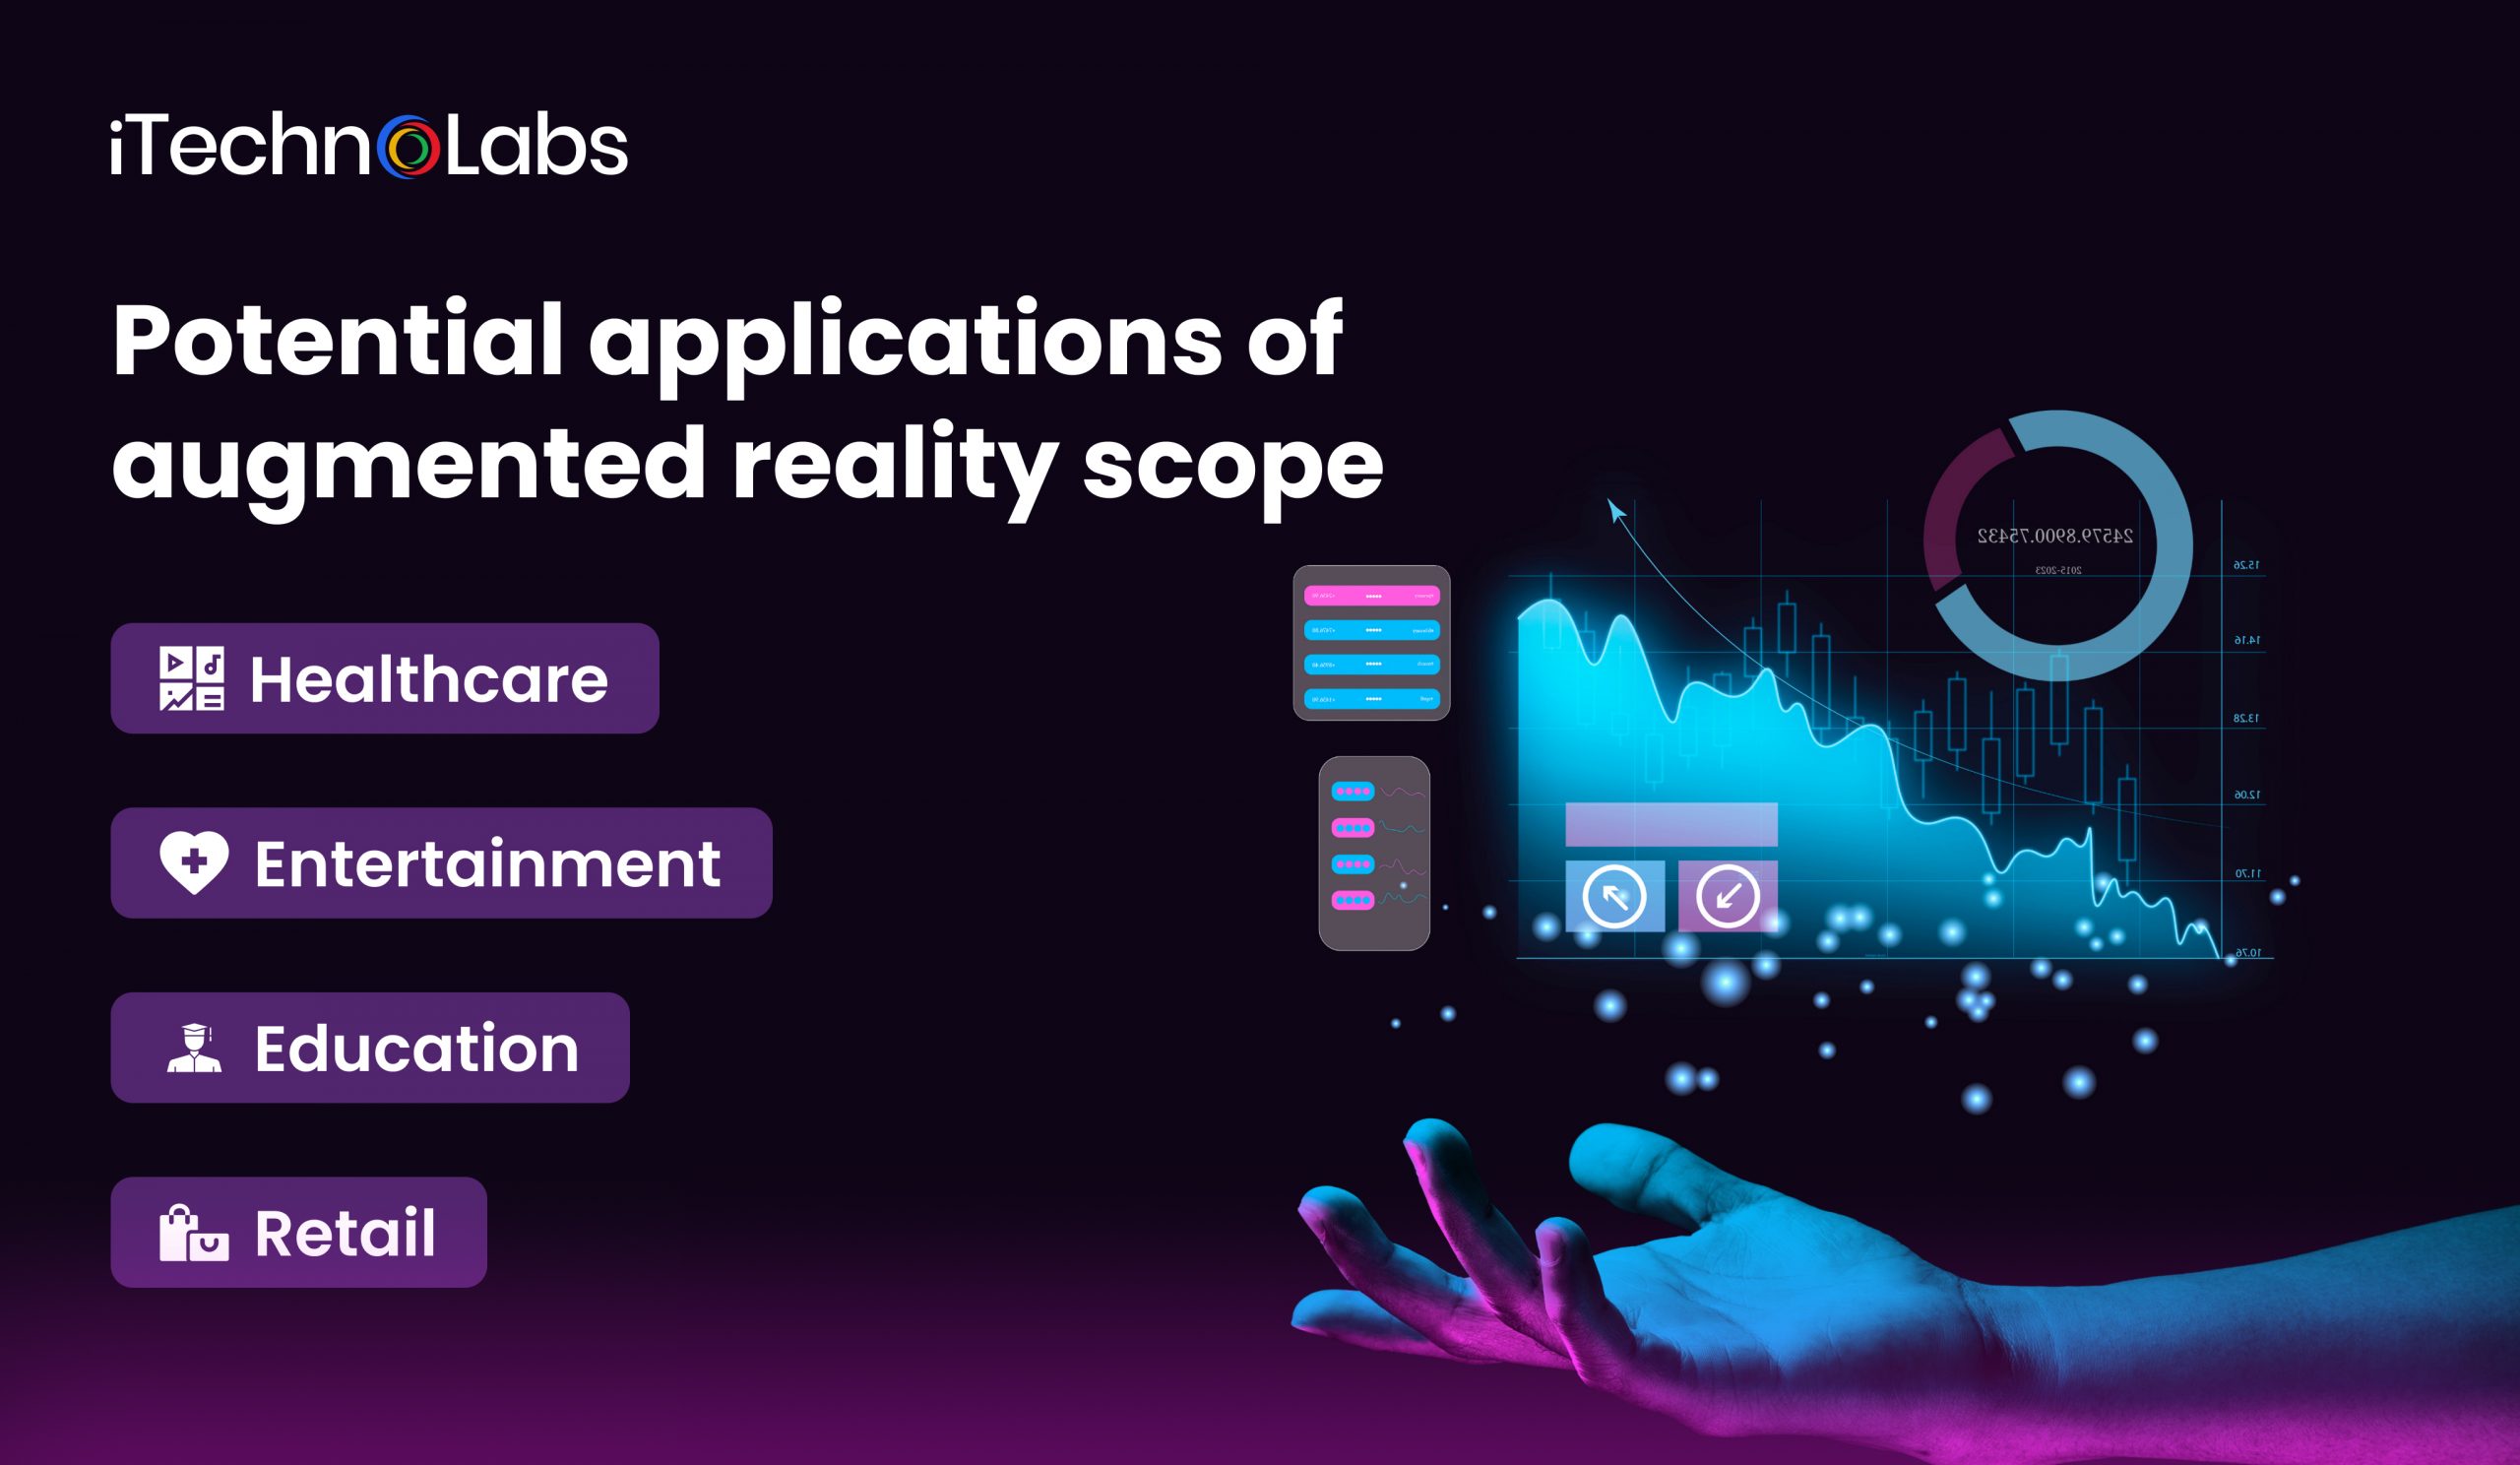 iTechnolabs-Potential applications of augmented reality scope